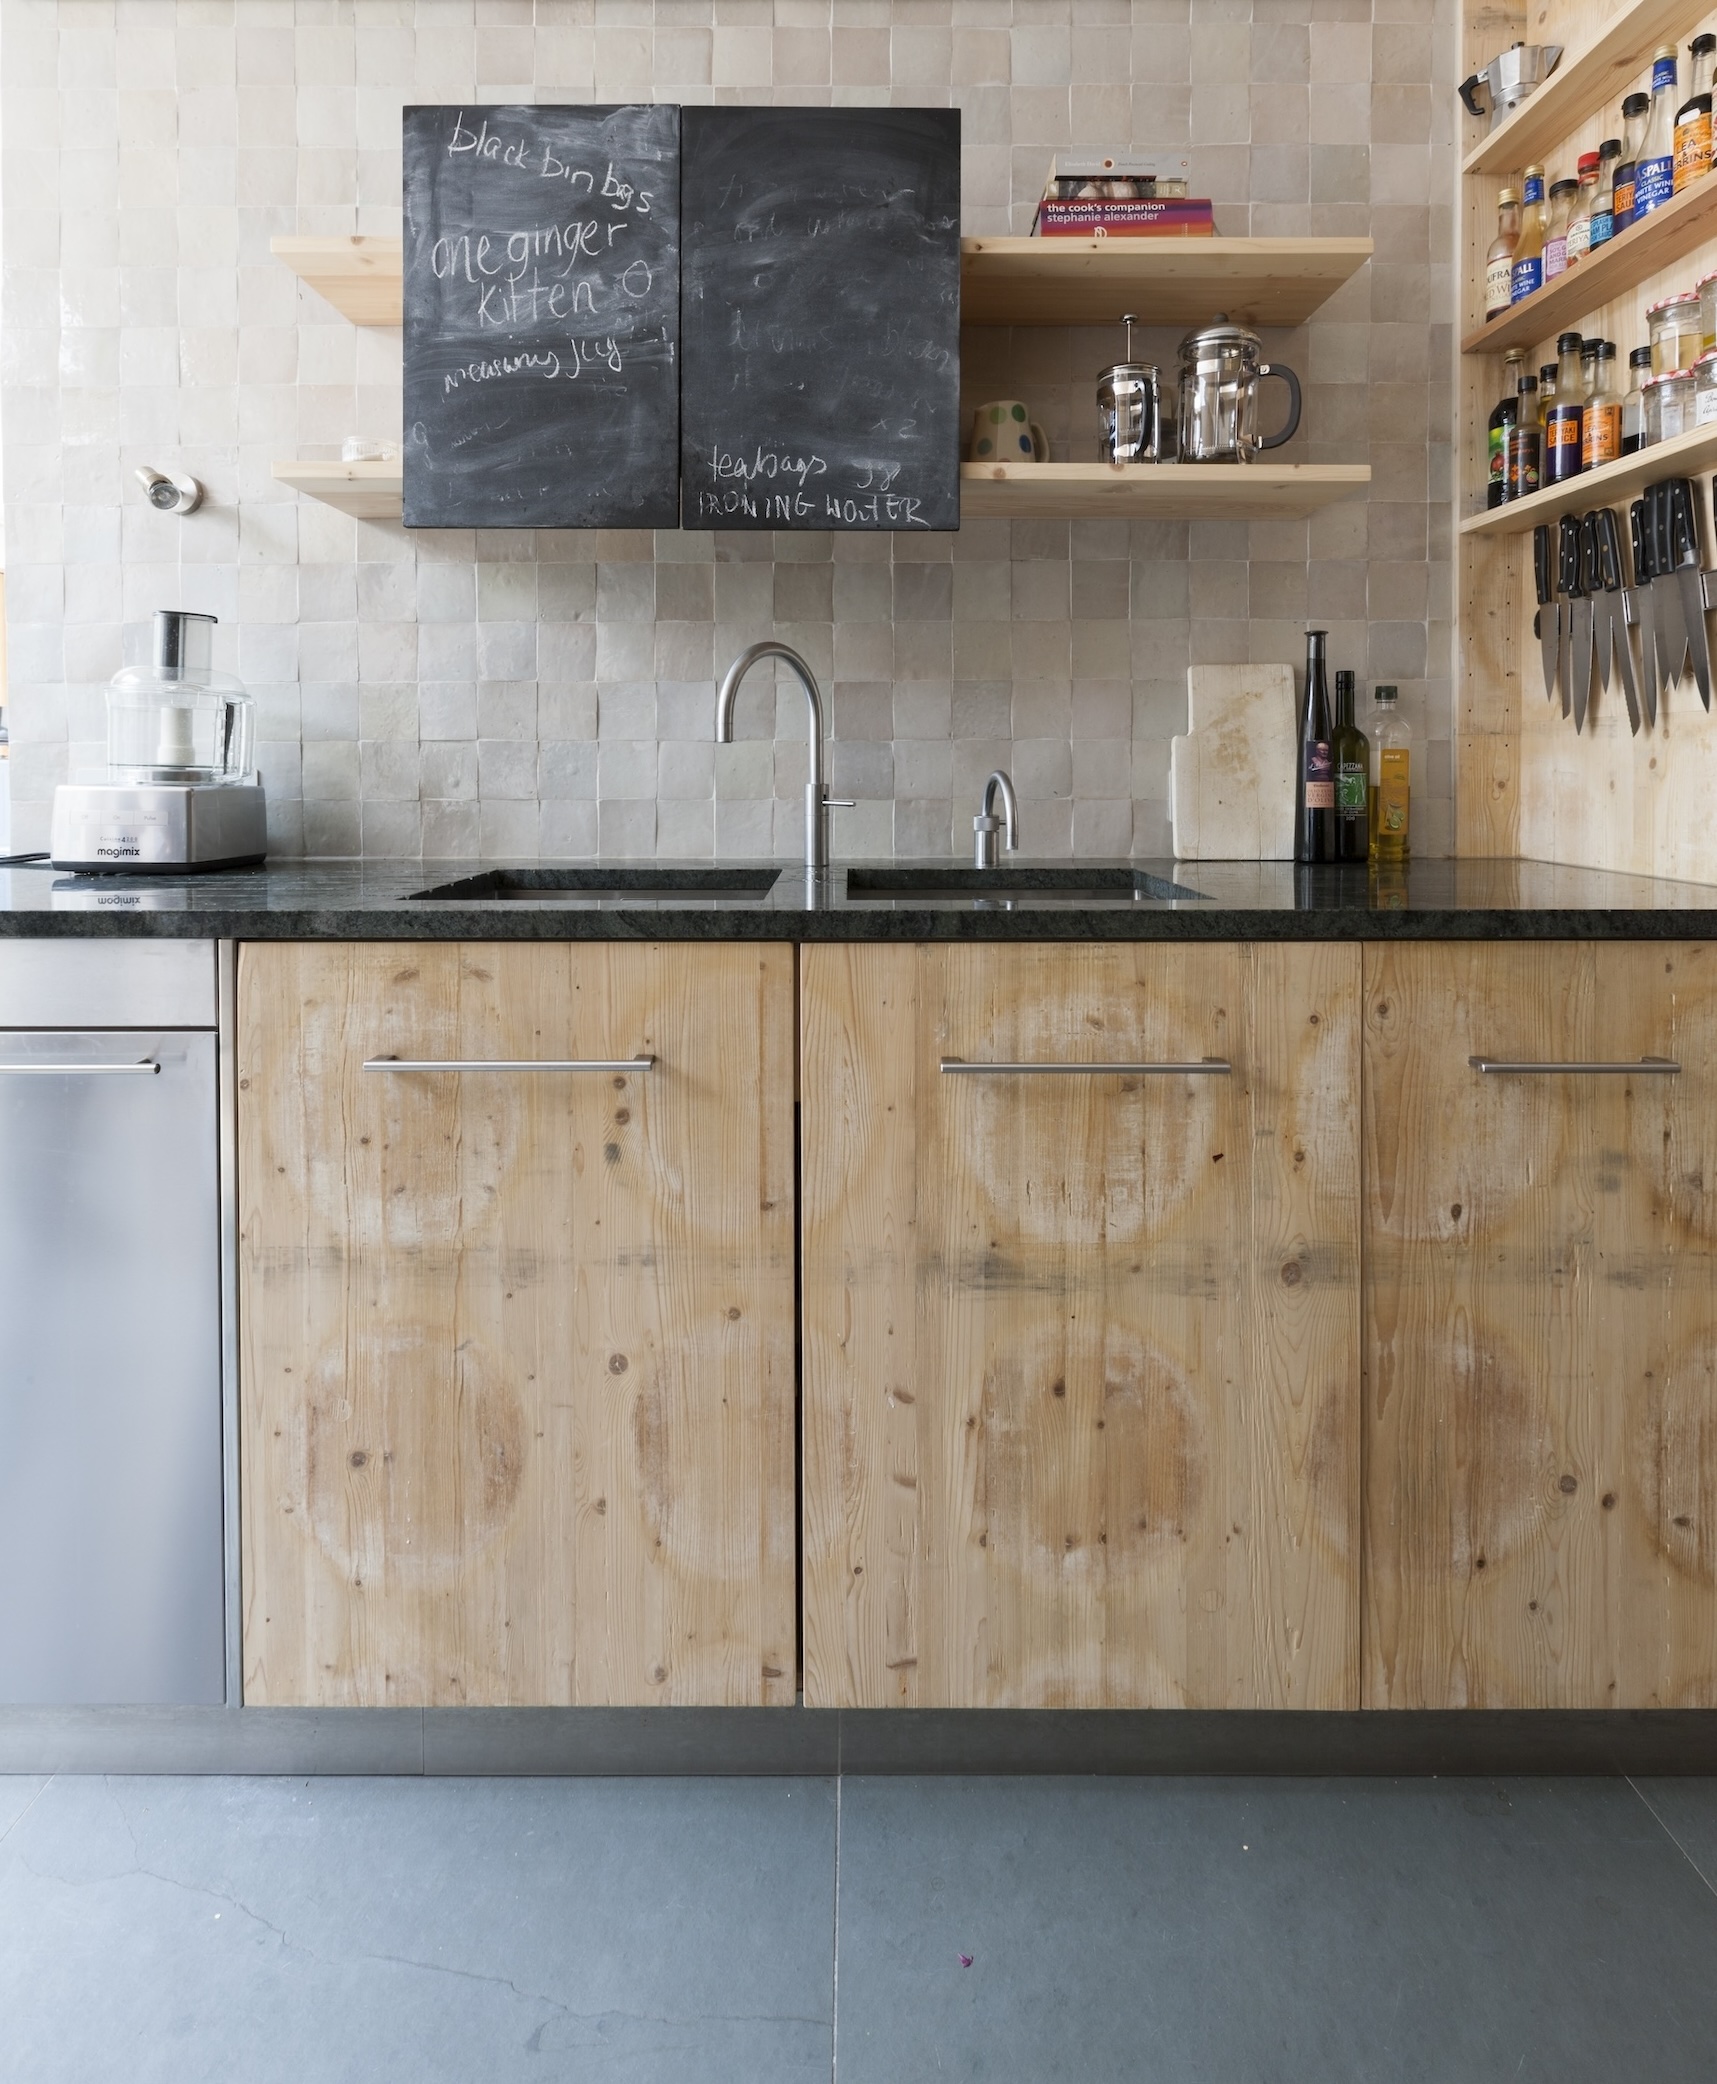 retrouvius kitchen from salvaged materials in north london. tom fallon photo. 260